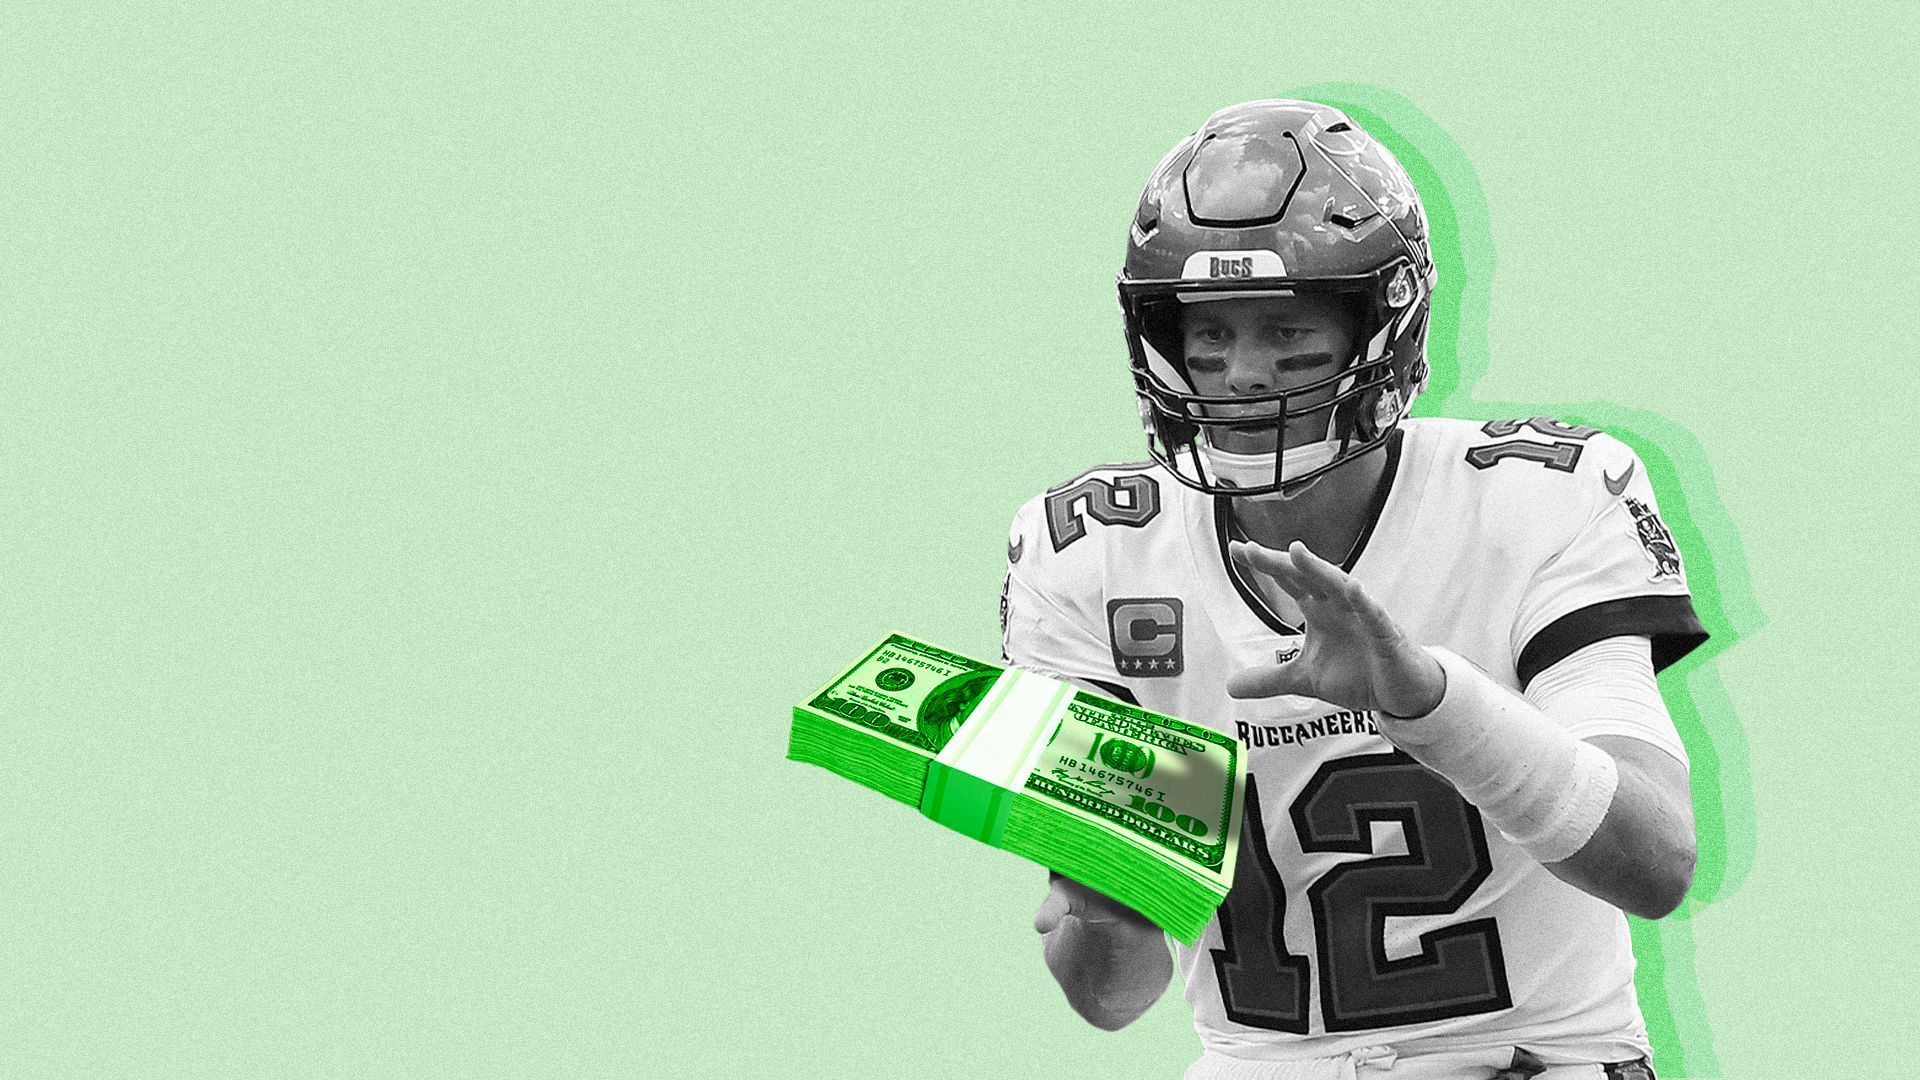 Illustration of Tom Brady in football uniform catching a stack of cash.